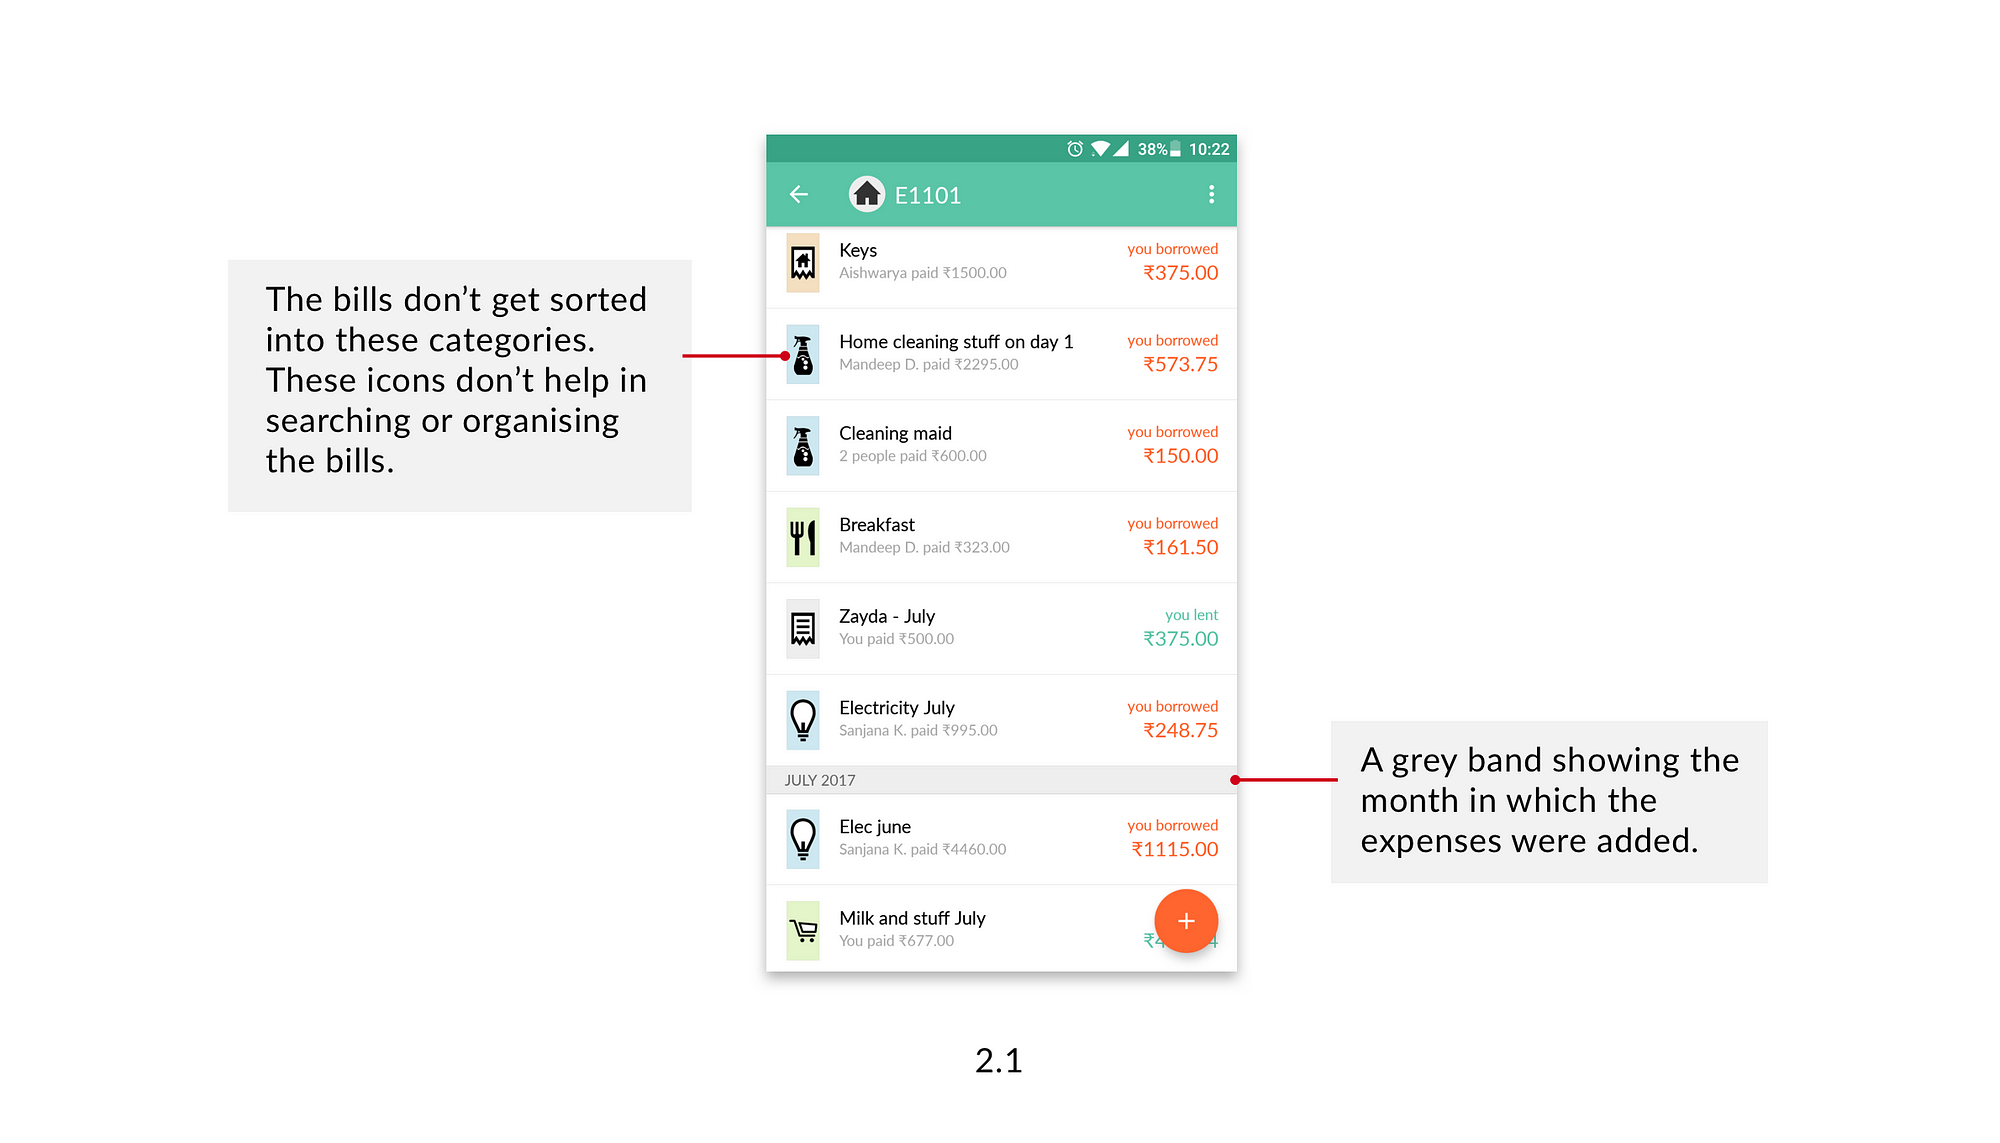 System Design of Backend for Expense Sharing Apps like Splitwise